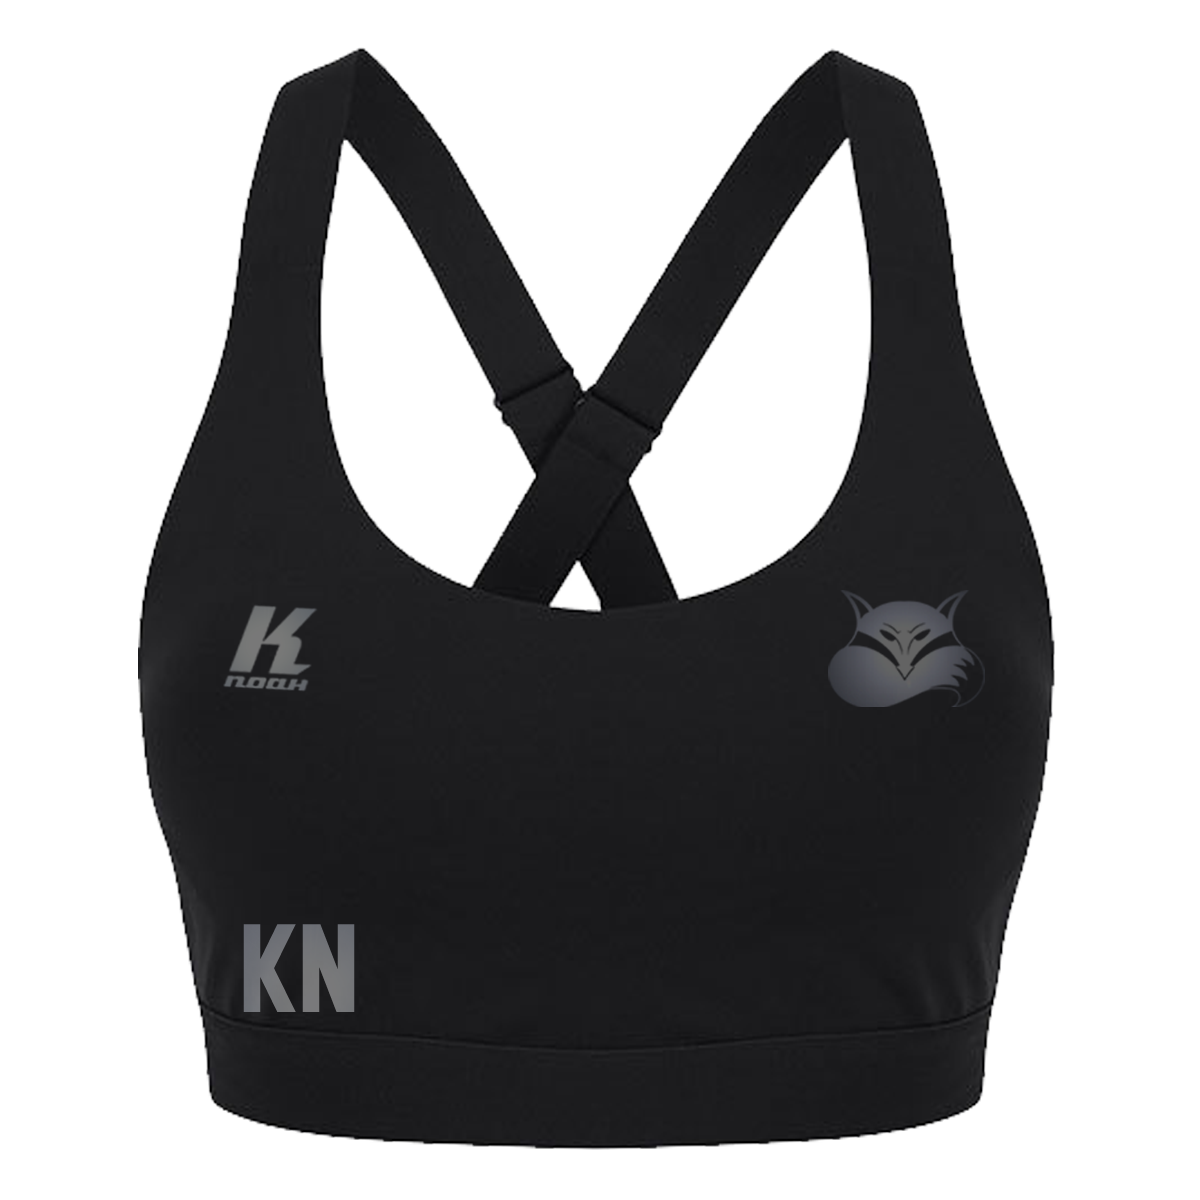 Foxes "Blackline" Womens Impact Core Bra TL371 with Initials/Playernumber